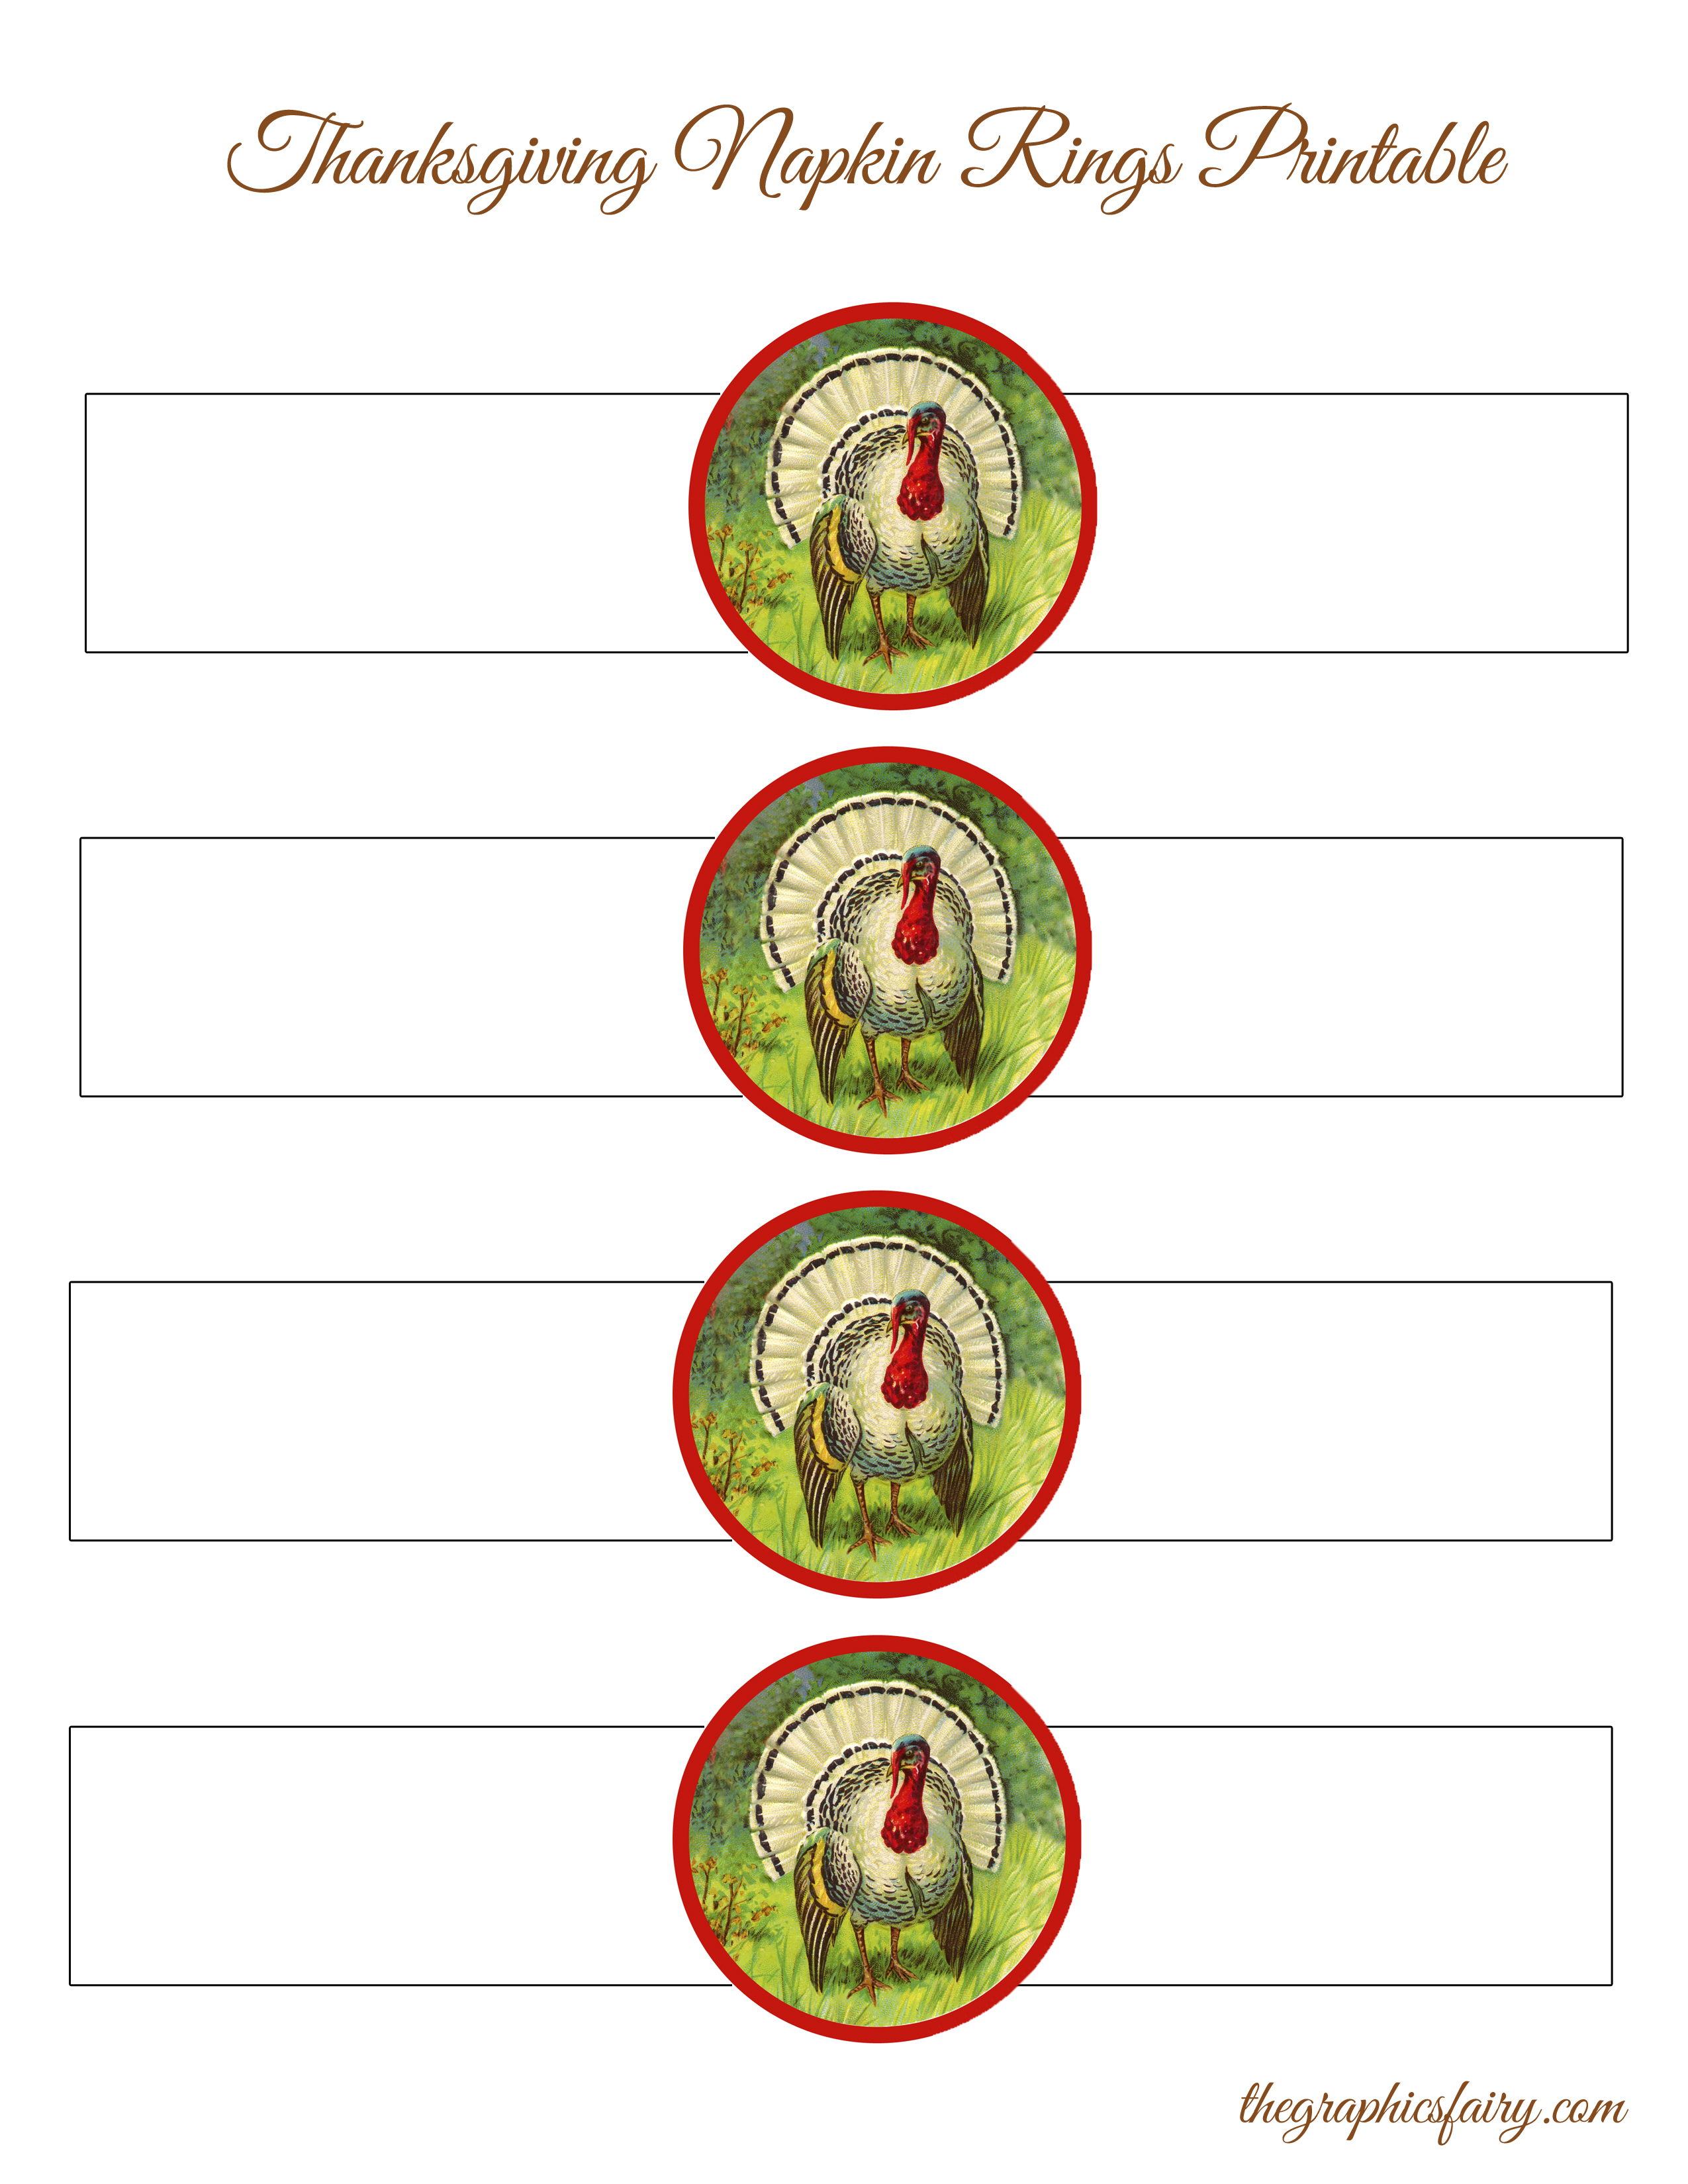 Thanksgiving Turkey Napkin Rings Template The Graphics Fairy